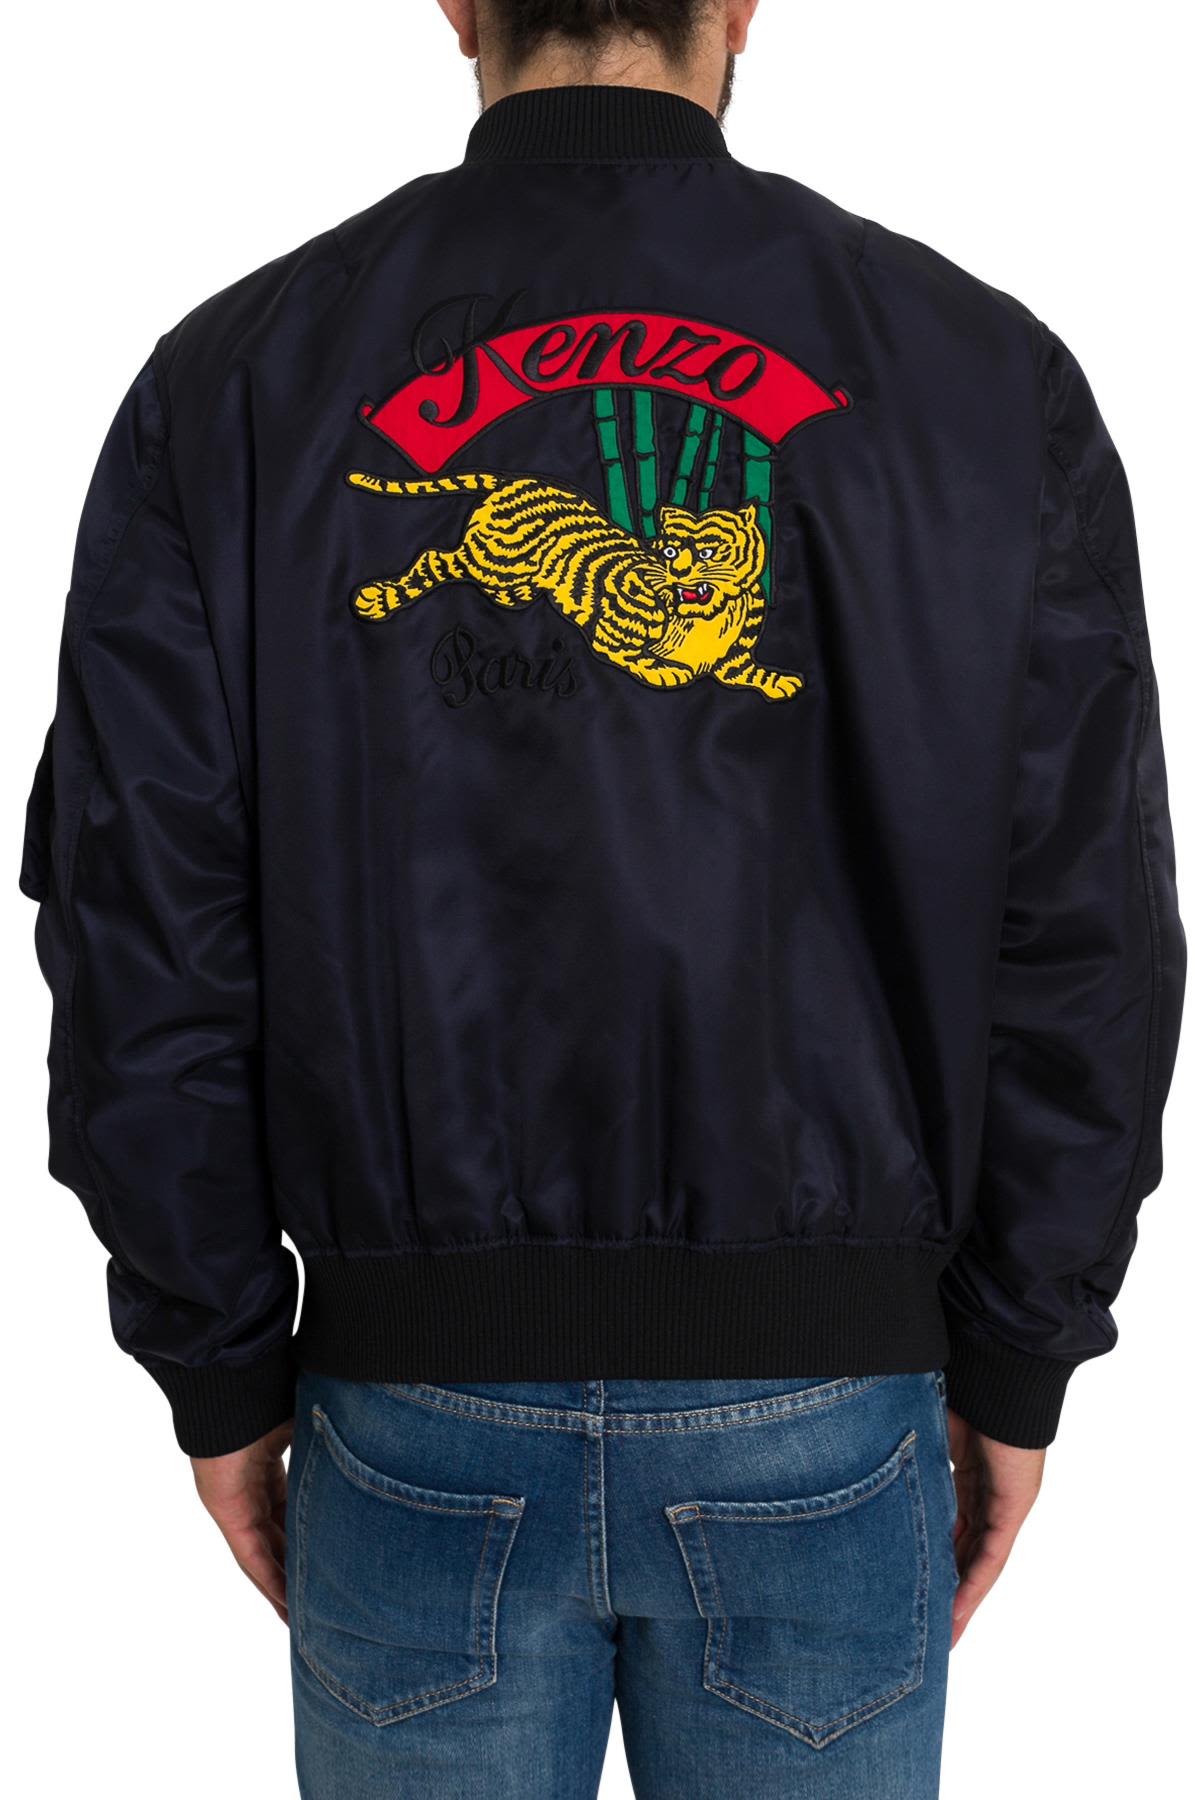 italist | Best price in the market for Kenzo Kenzo Jumping Tiger Bomber ...